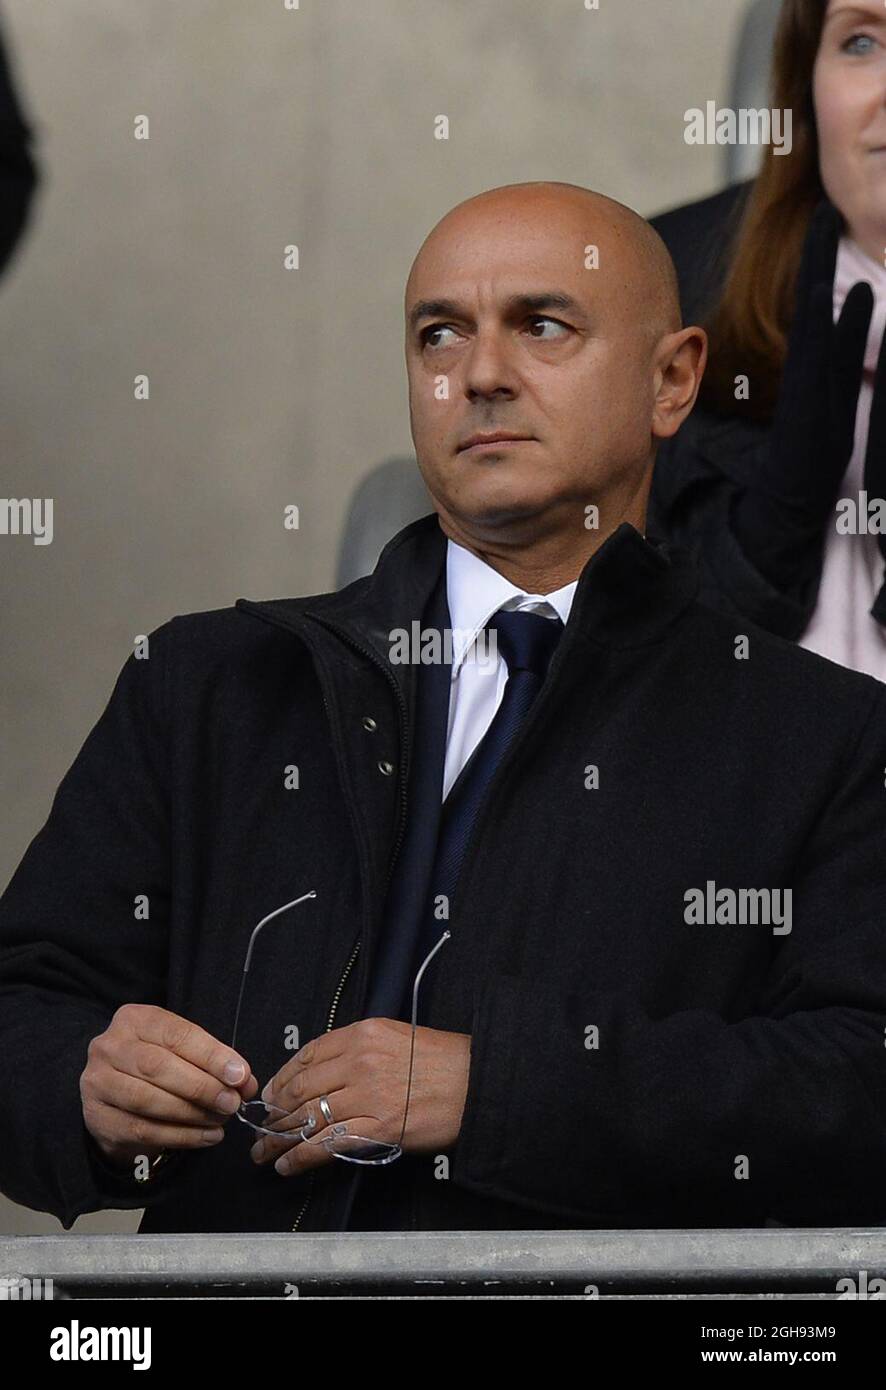 Daniel Levy chairman of Tottenham during the Barclays Premier League match between Wigan Athletic and Tottenham Hotspur at the DW Stadium in Wigan, UK on April 27, 2013. Stock Photo